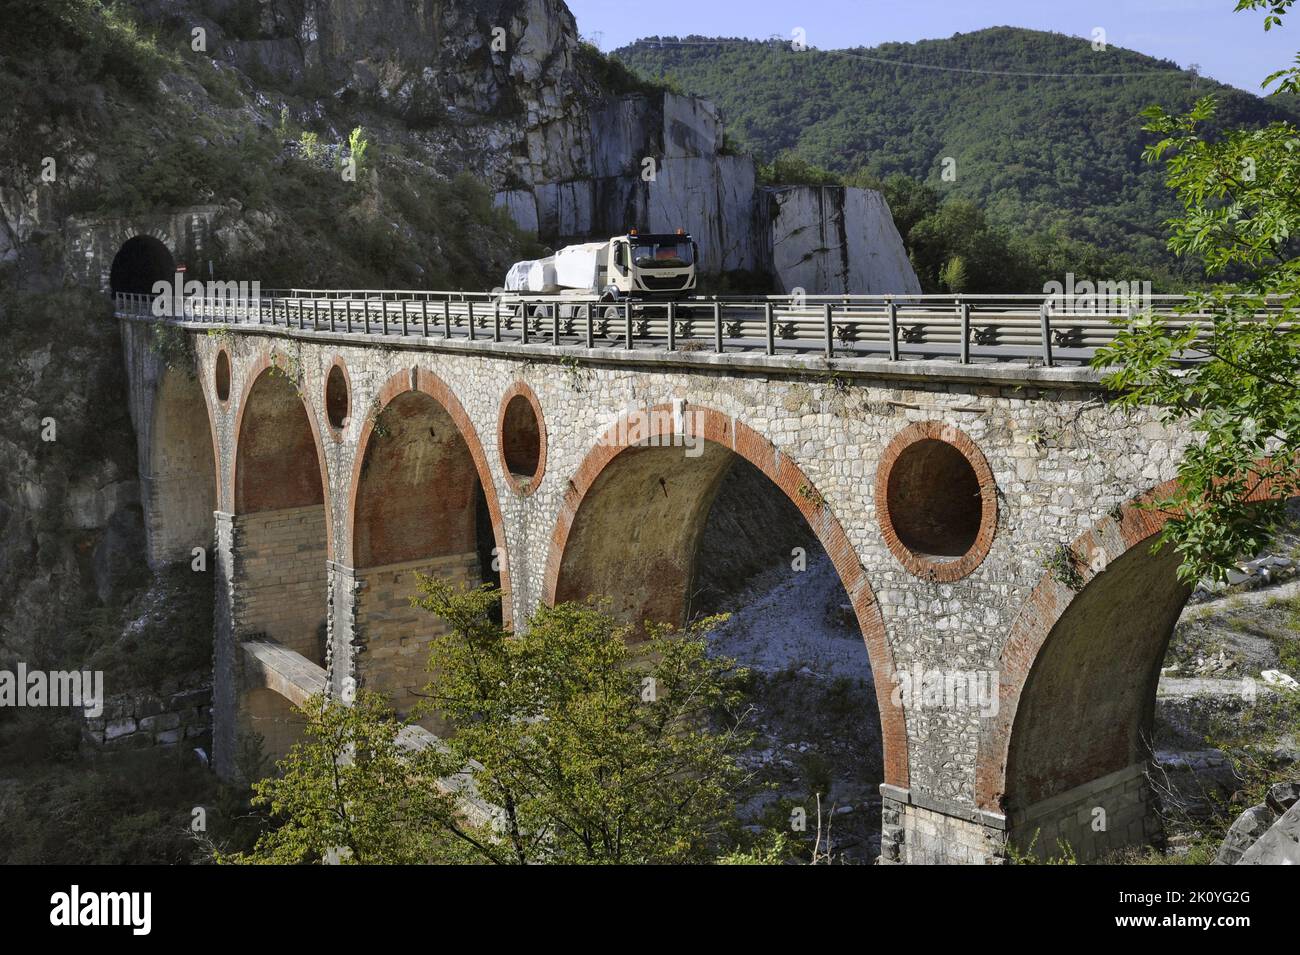 Carrara (Tuscany, Italy), bridges of Vara, ancient run of the railroad that served the marble quarries Stock Photo